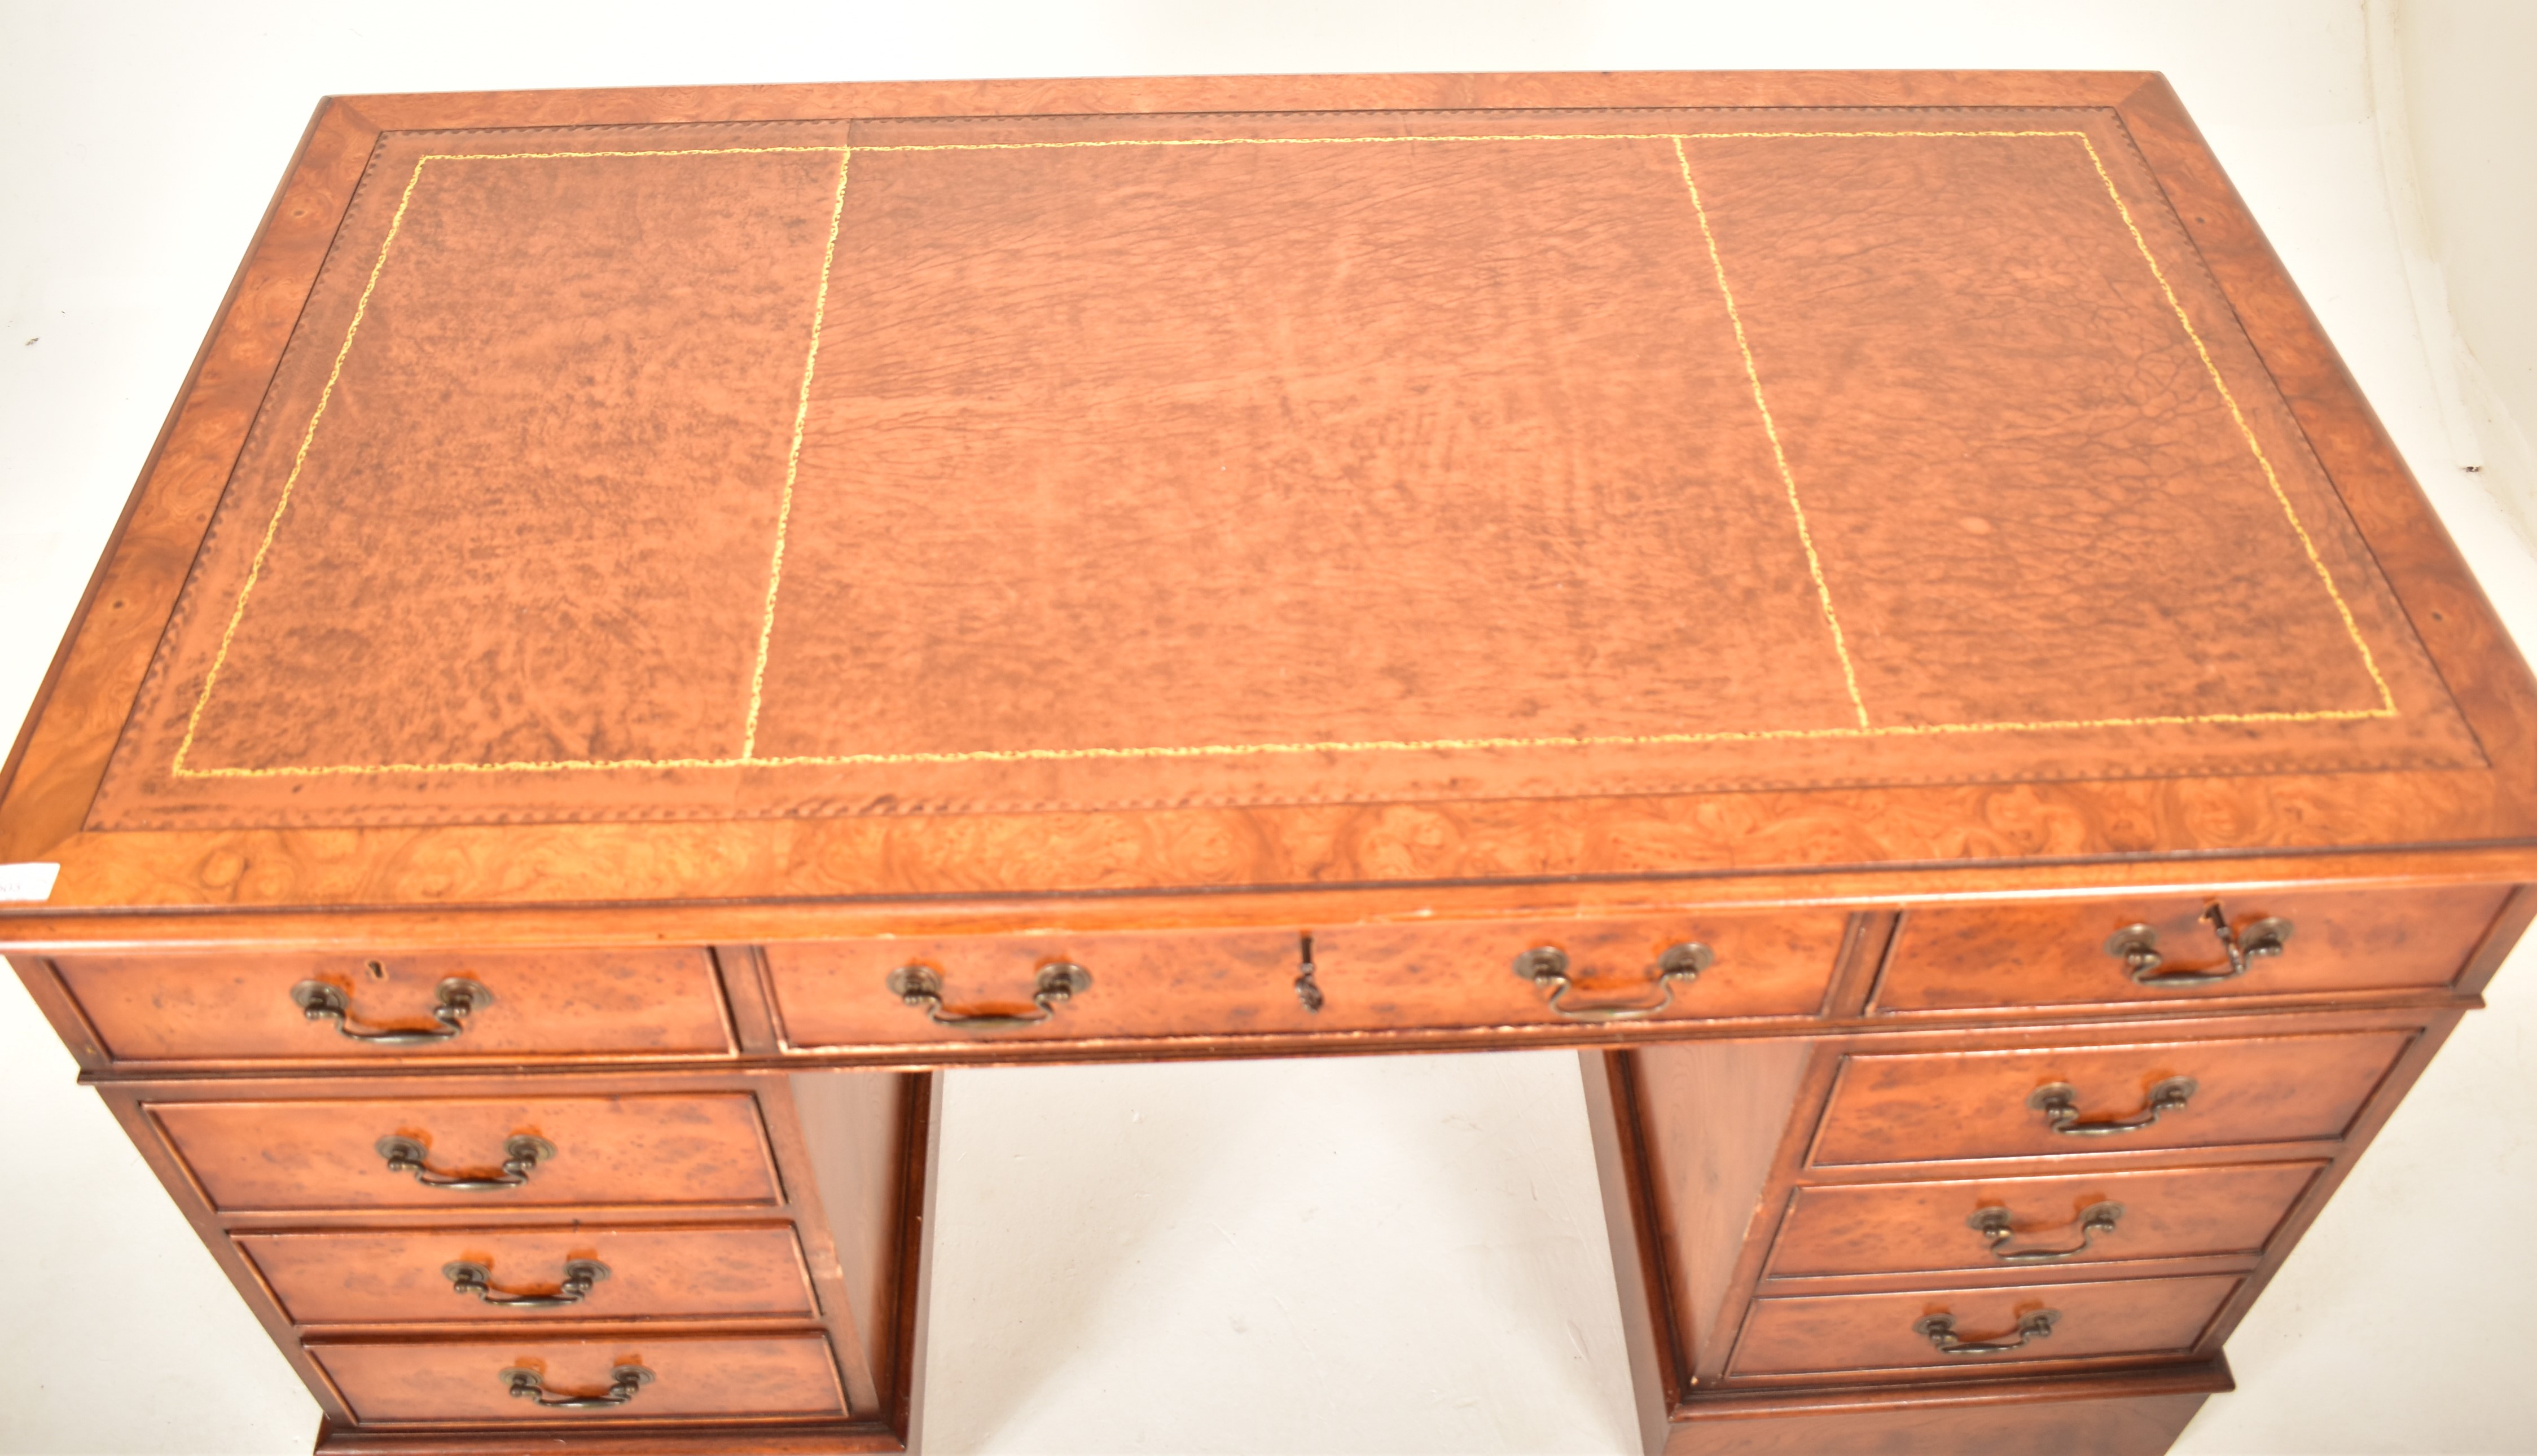 GEORGE III REVIVAL BURR WALNUT TWIN PEDESTAL DESK WITH CHAIR - Image 2 of 10